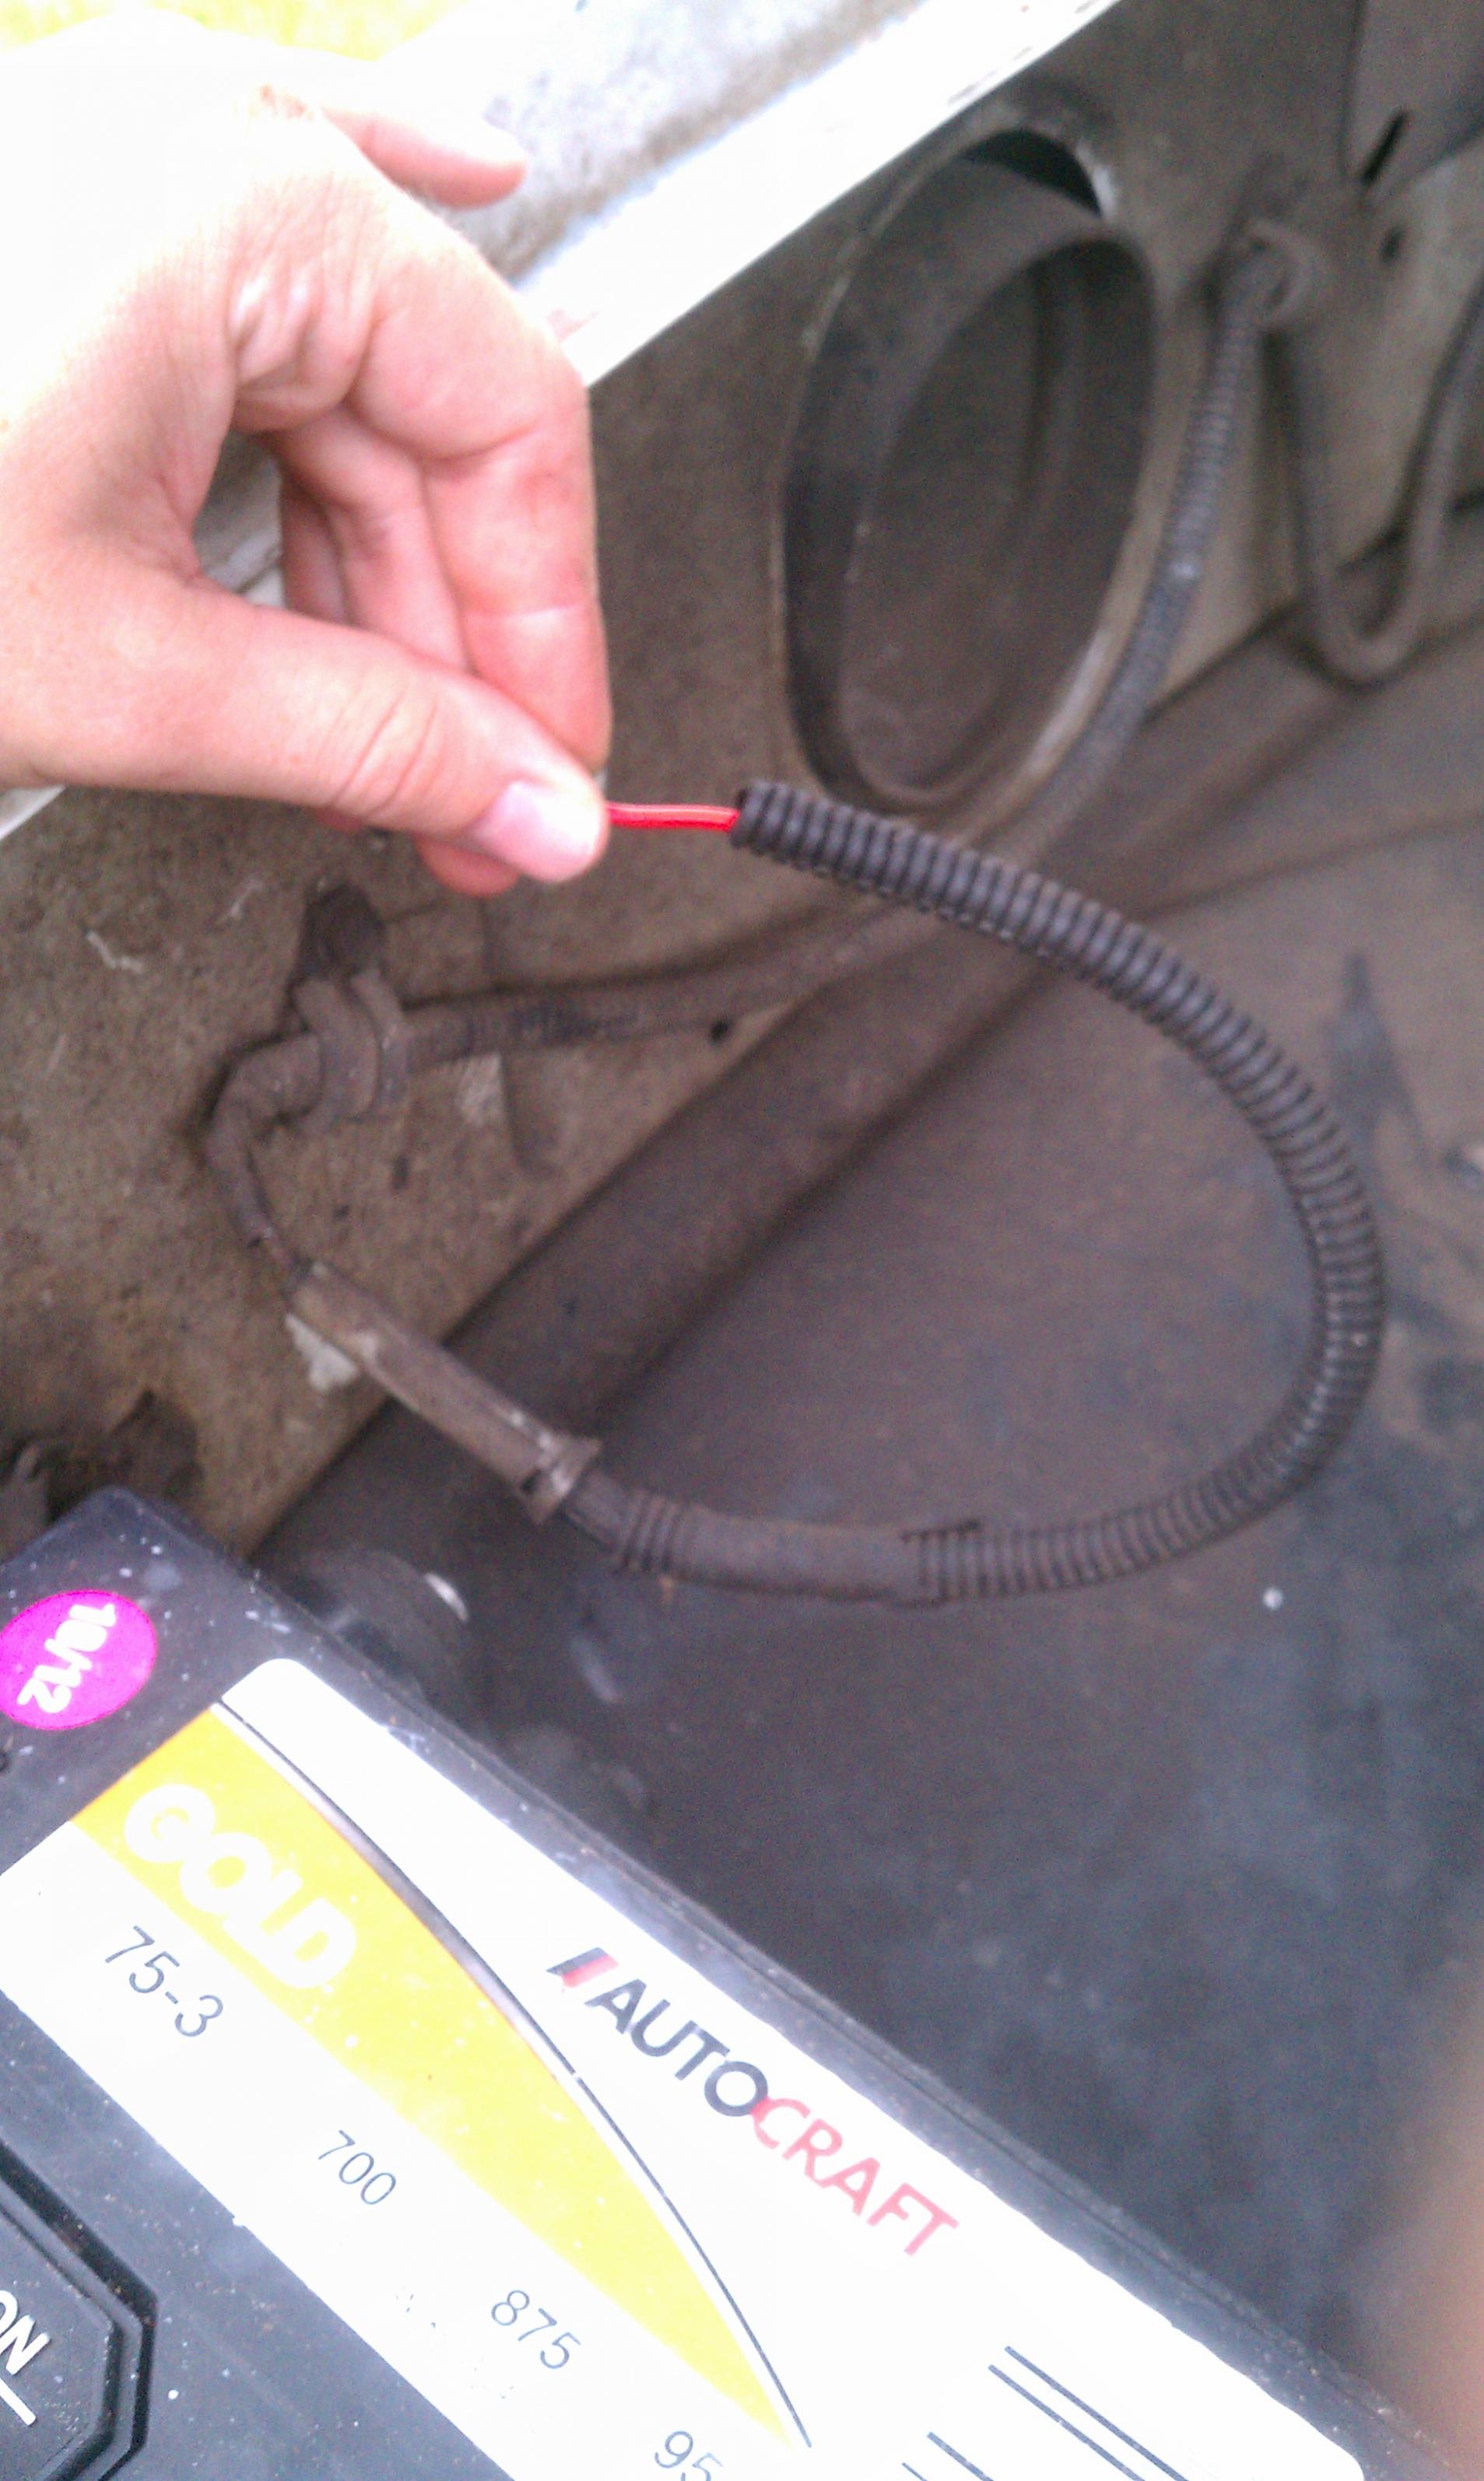 92' c1500 wiring issue - Chevrolet Forum - Chevy Enthusiasts Forums